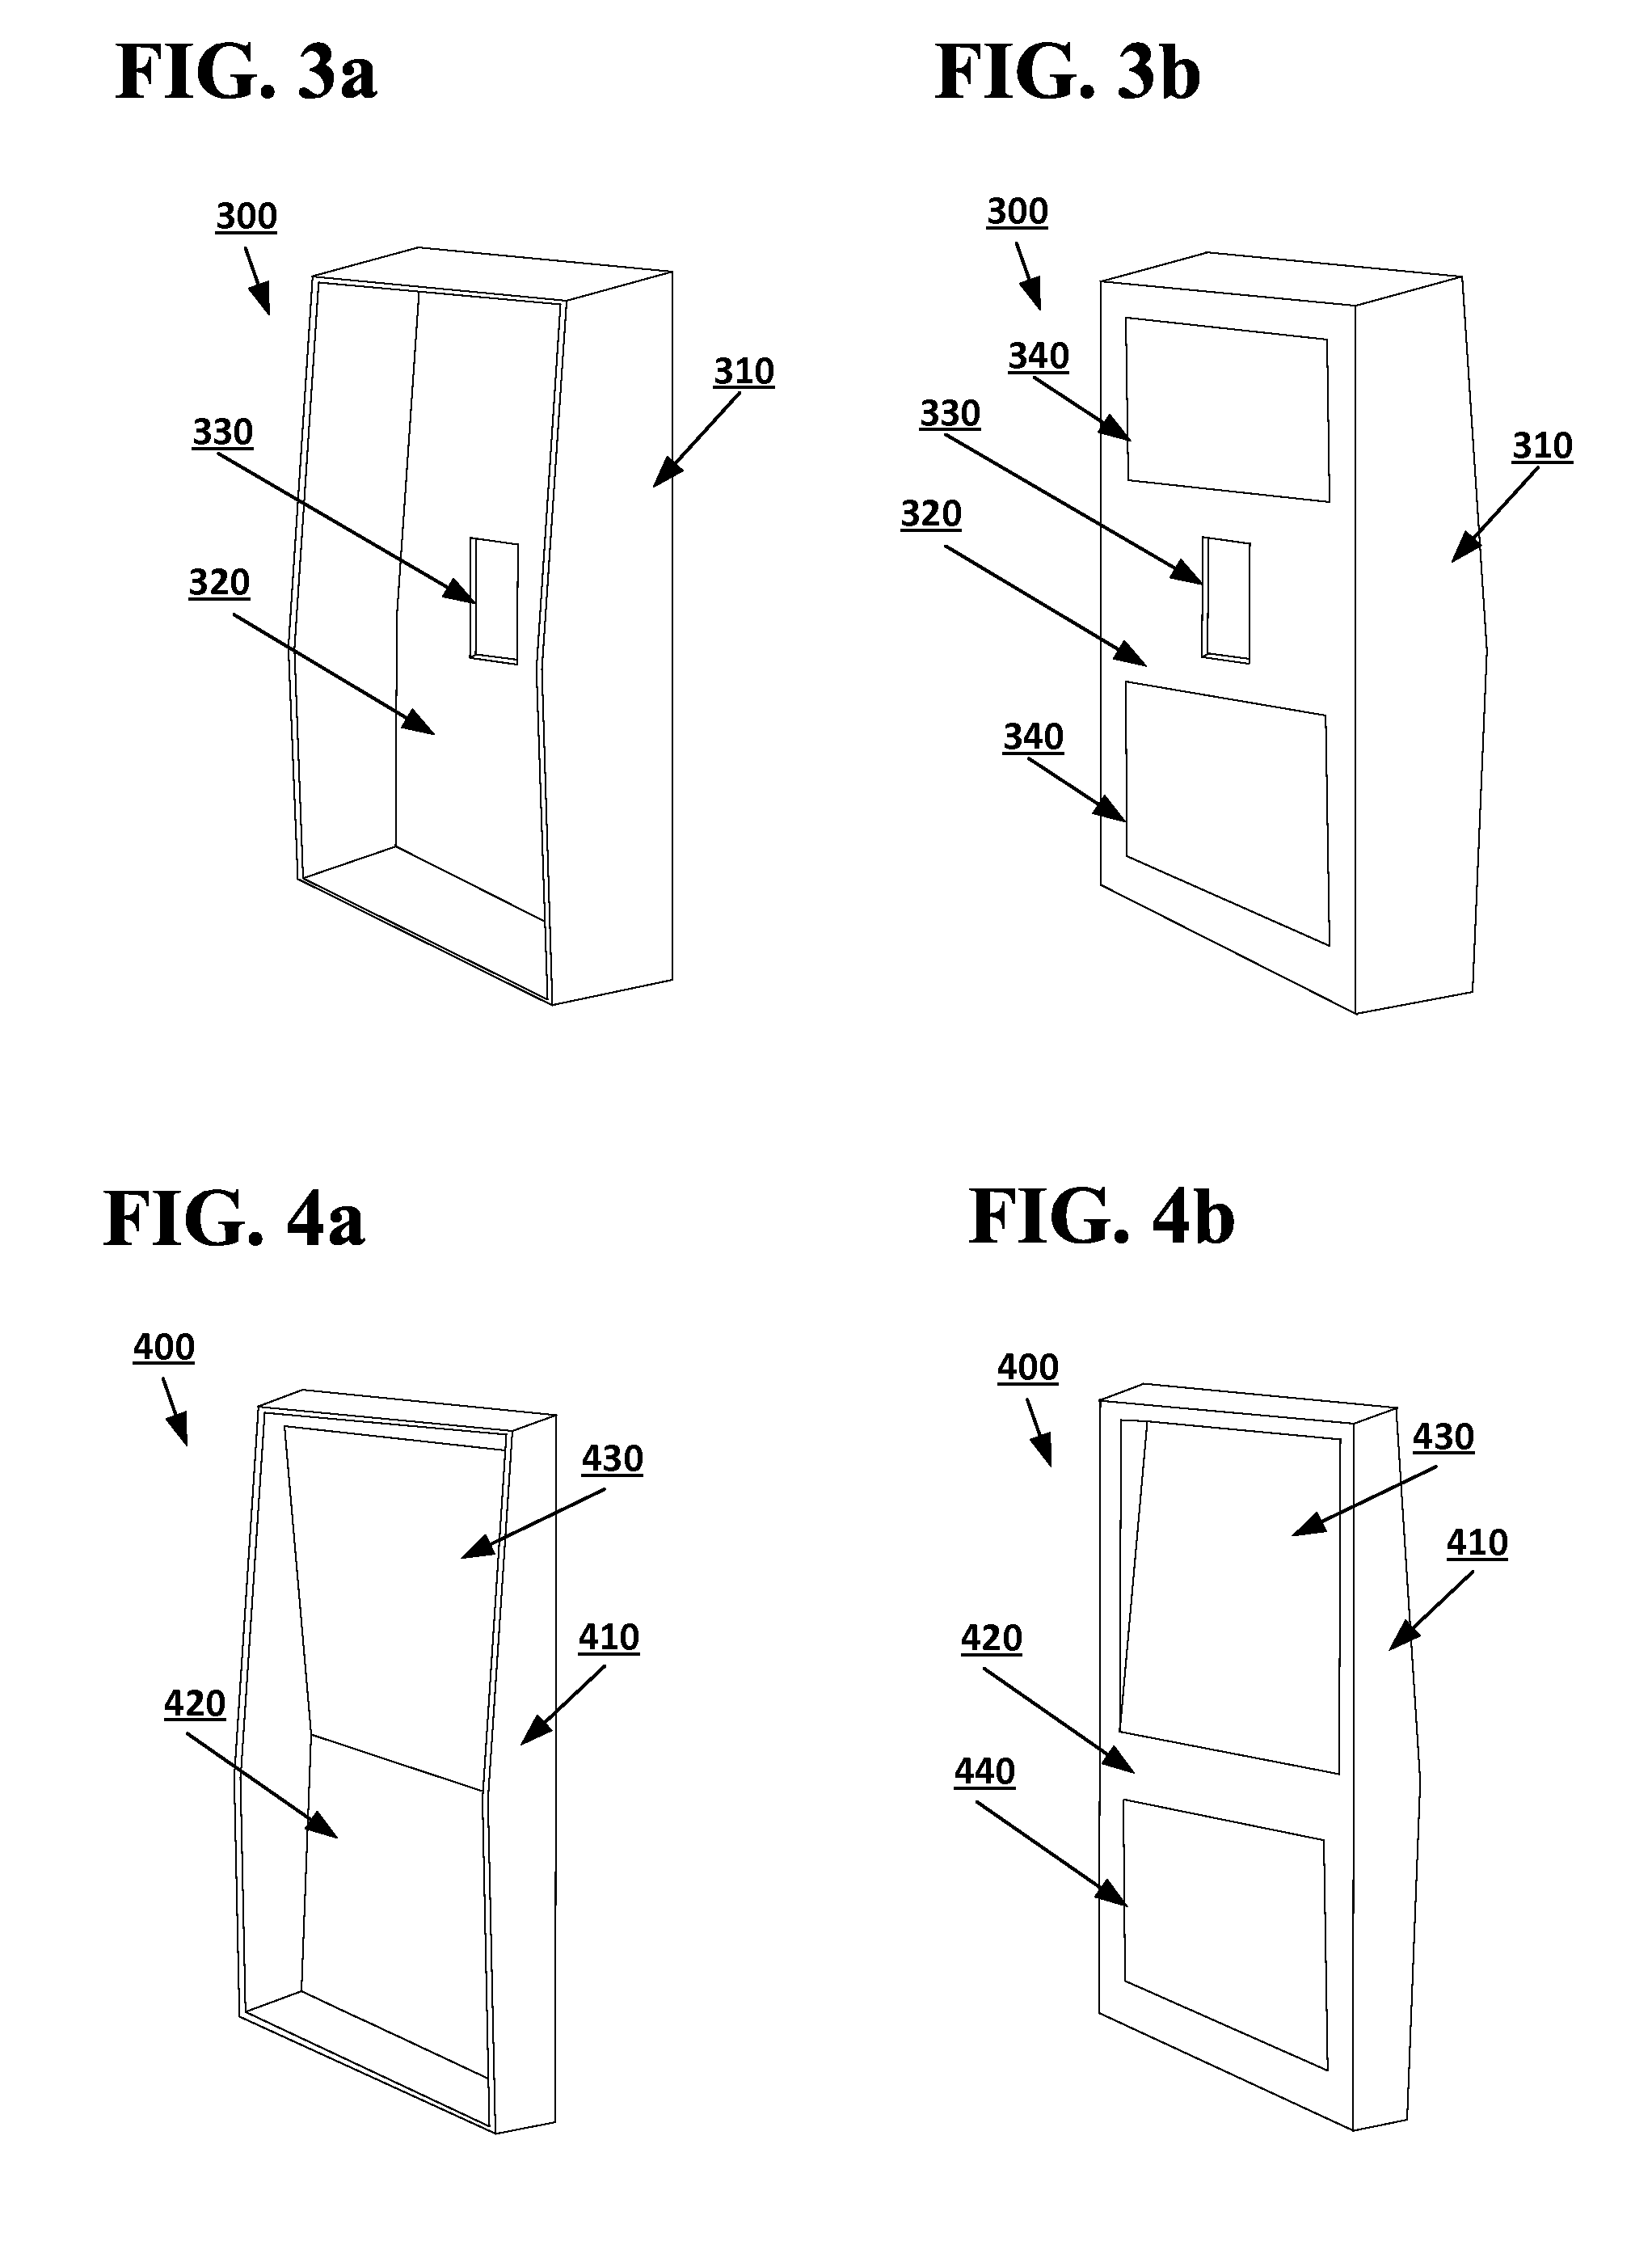 Interchangeable back system for programmable switches